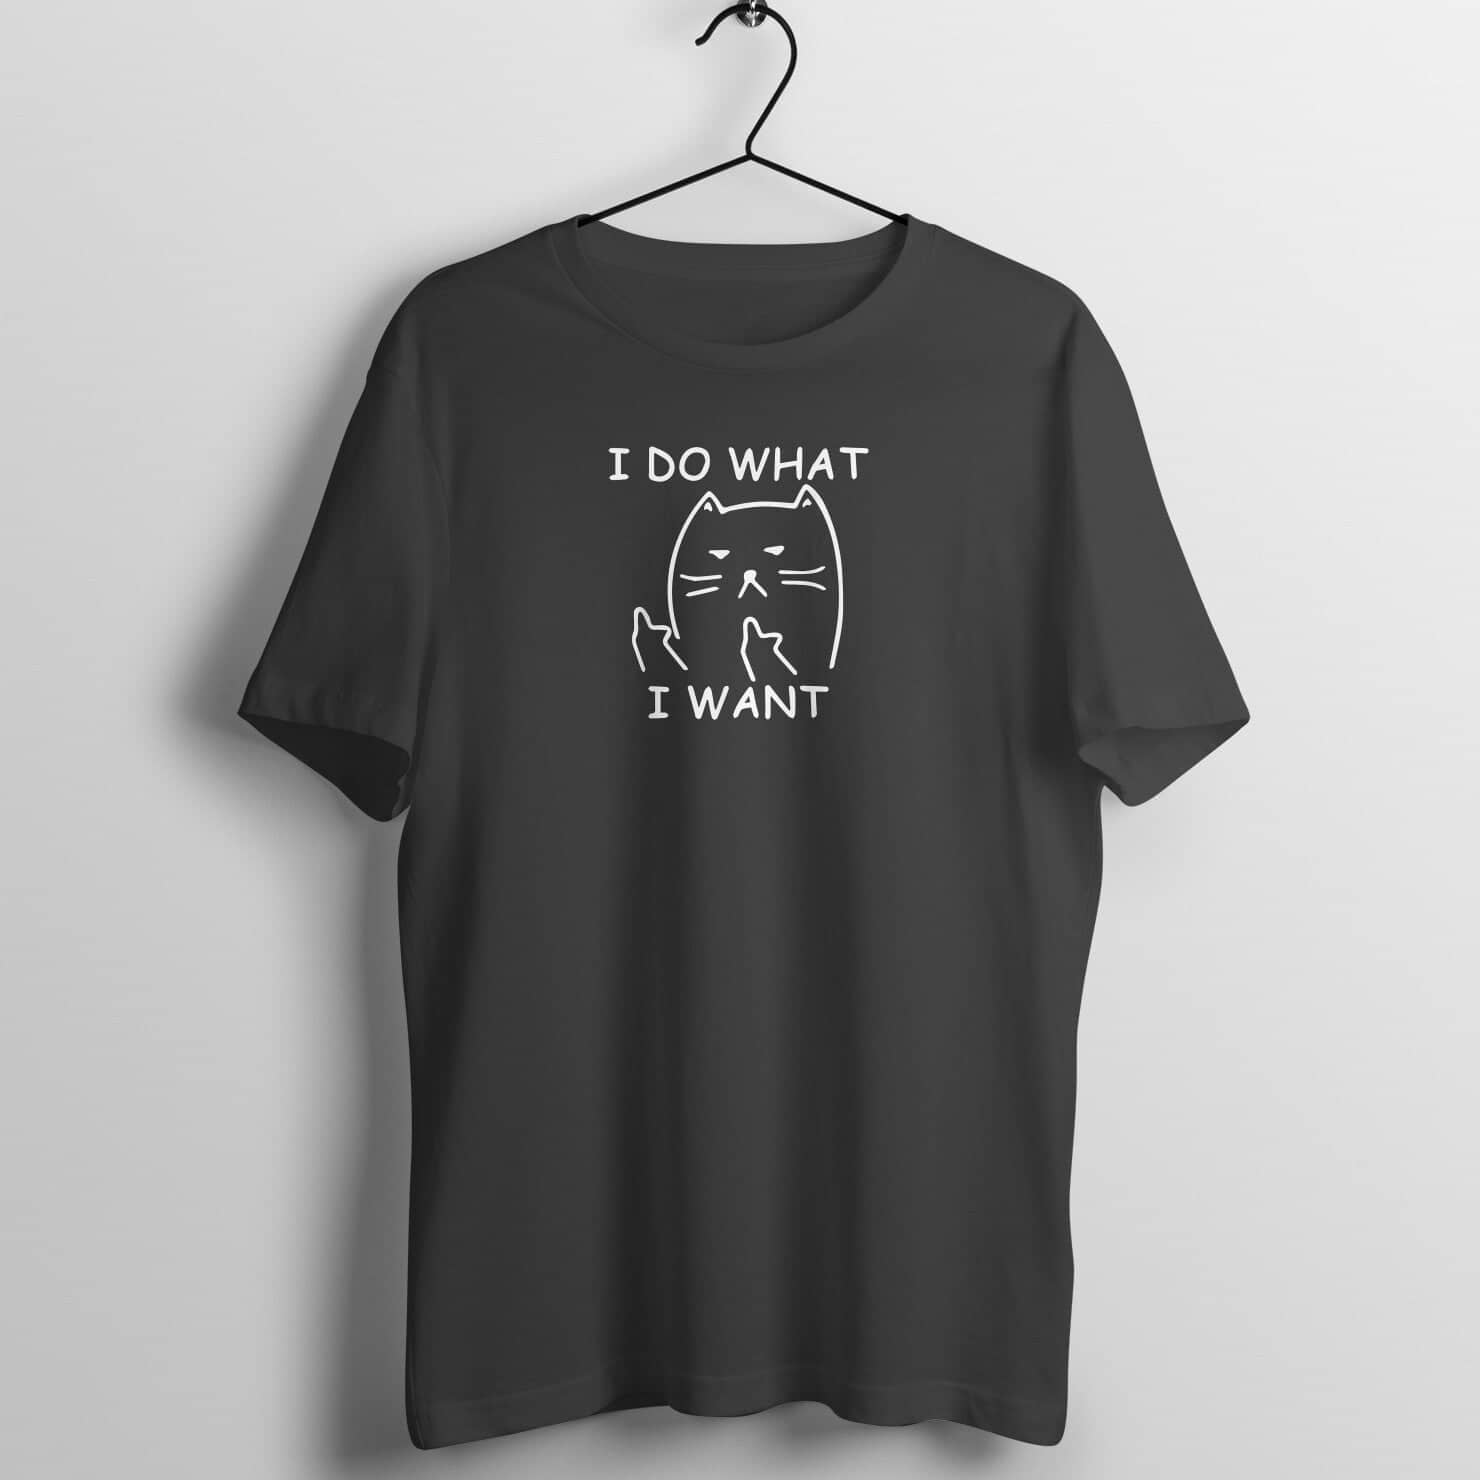 I Do What I Want No F's Given Funny Black T Shirt for Men and Women freeshipping - Catch My Drift India